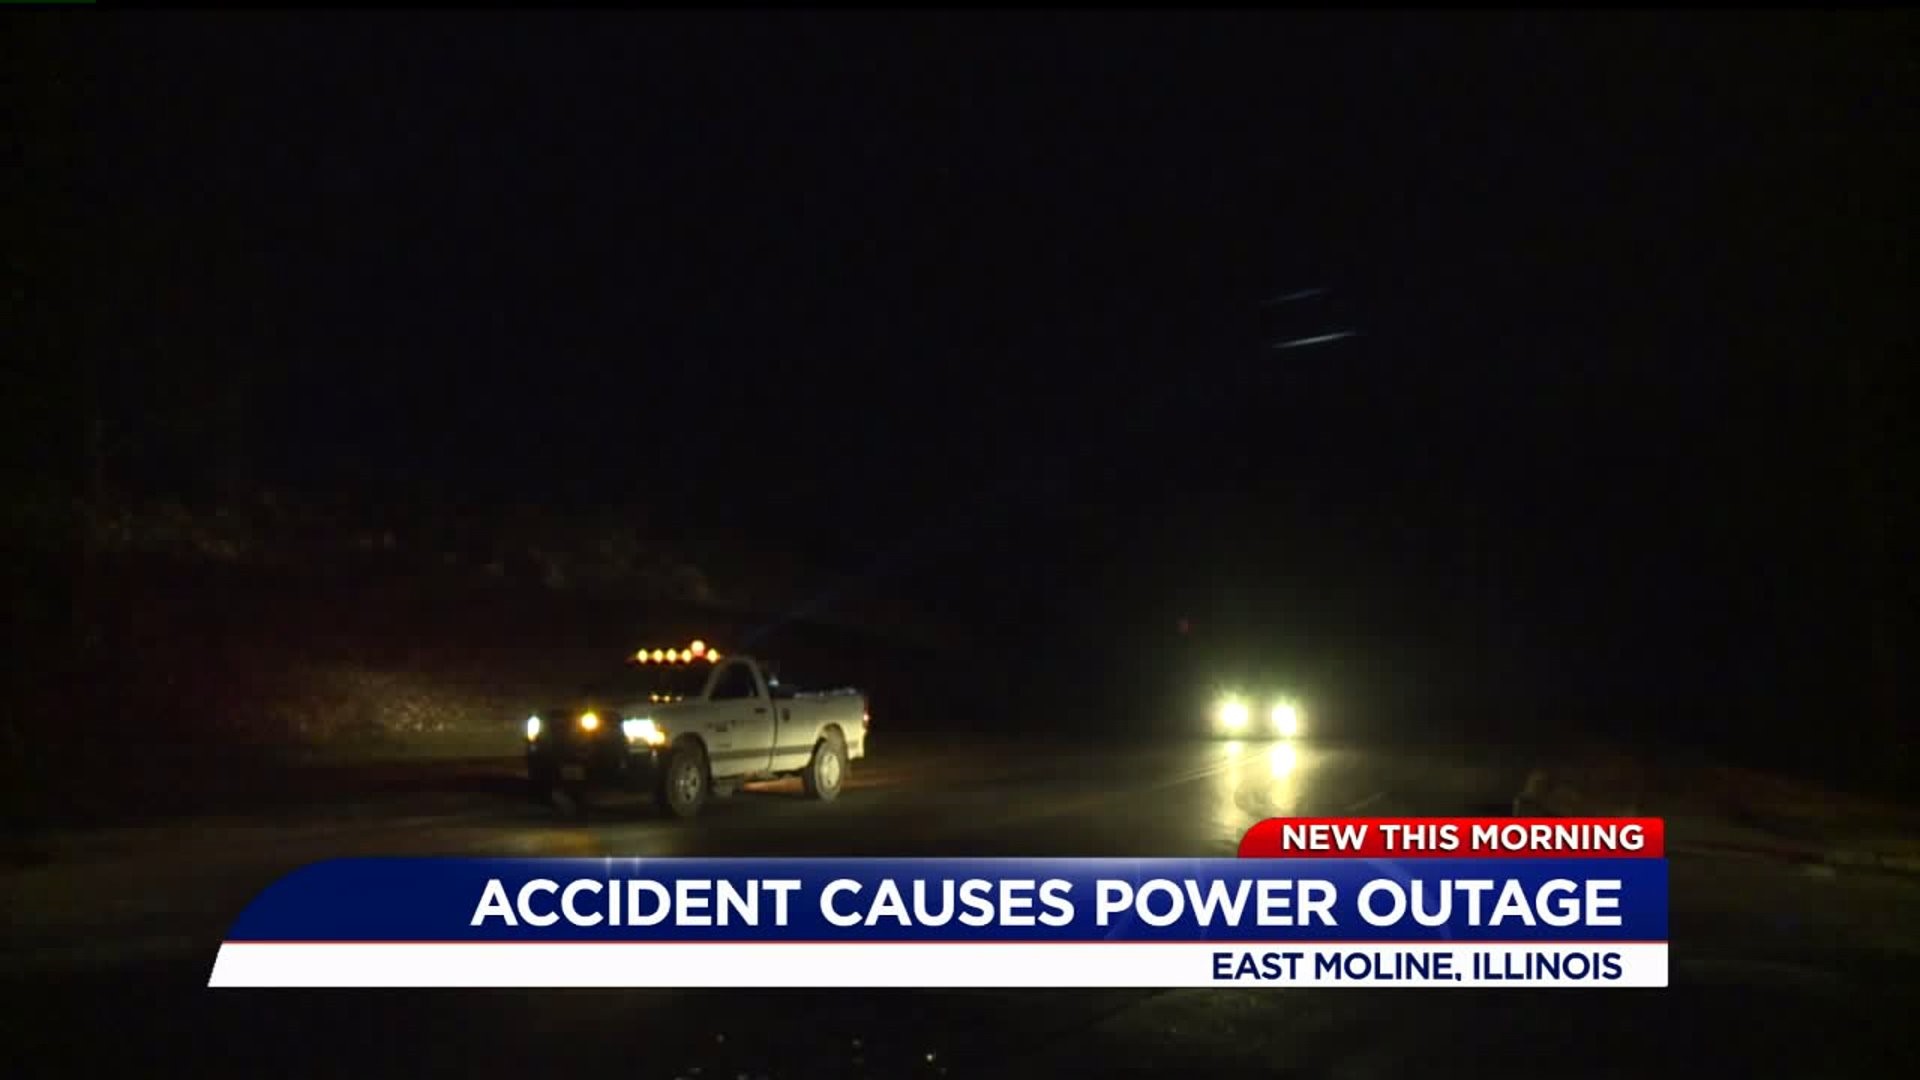 Accident causes power outage overnight